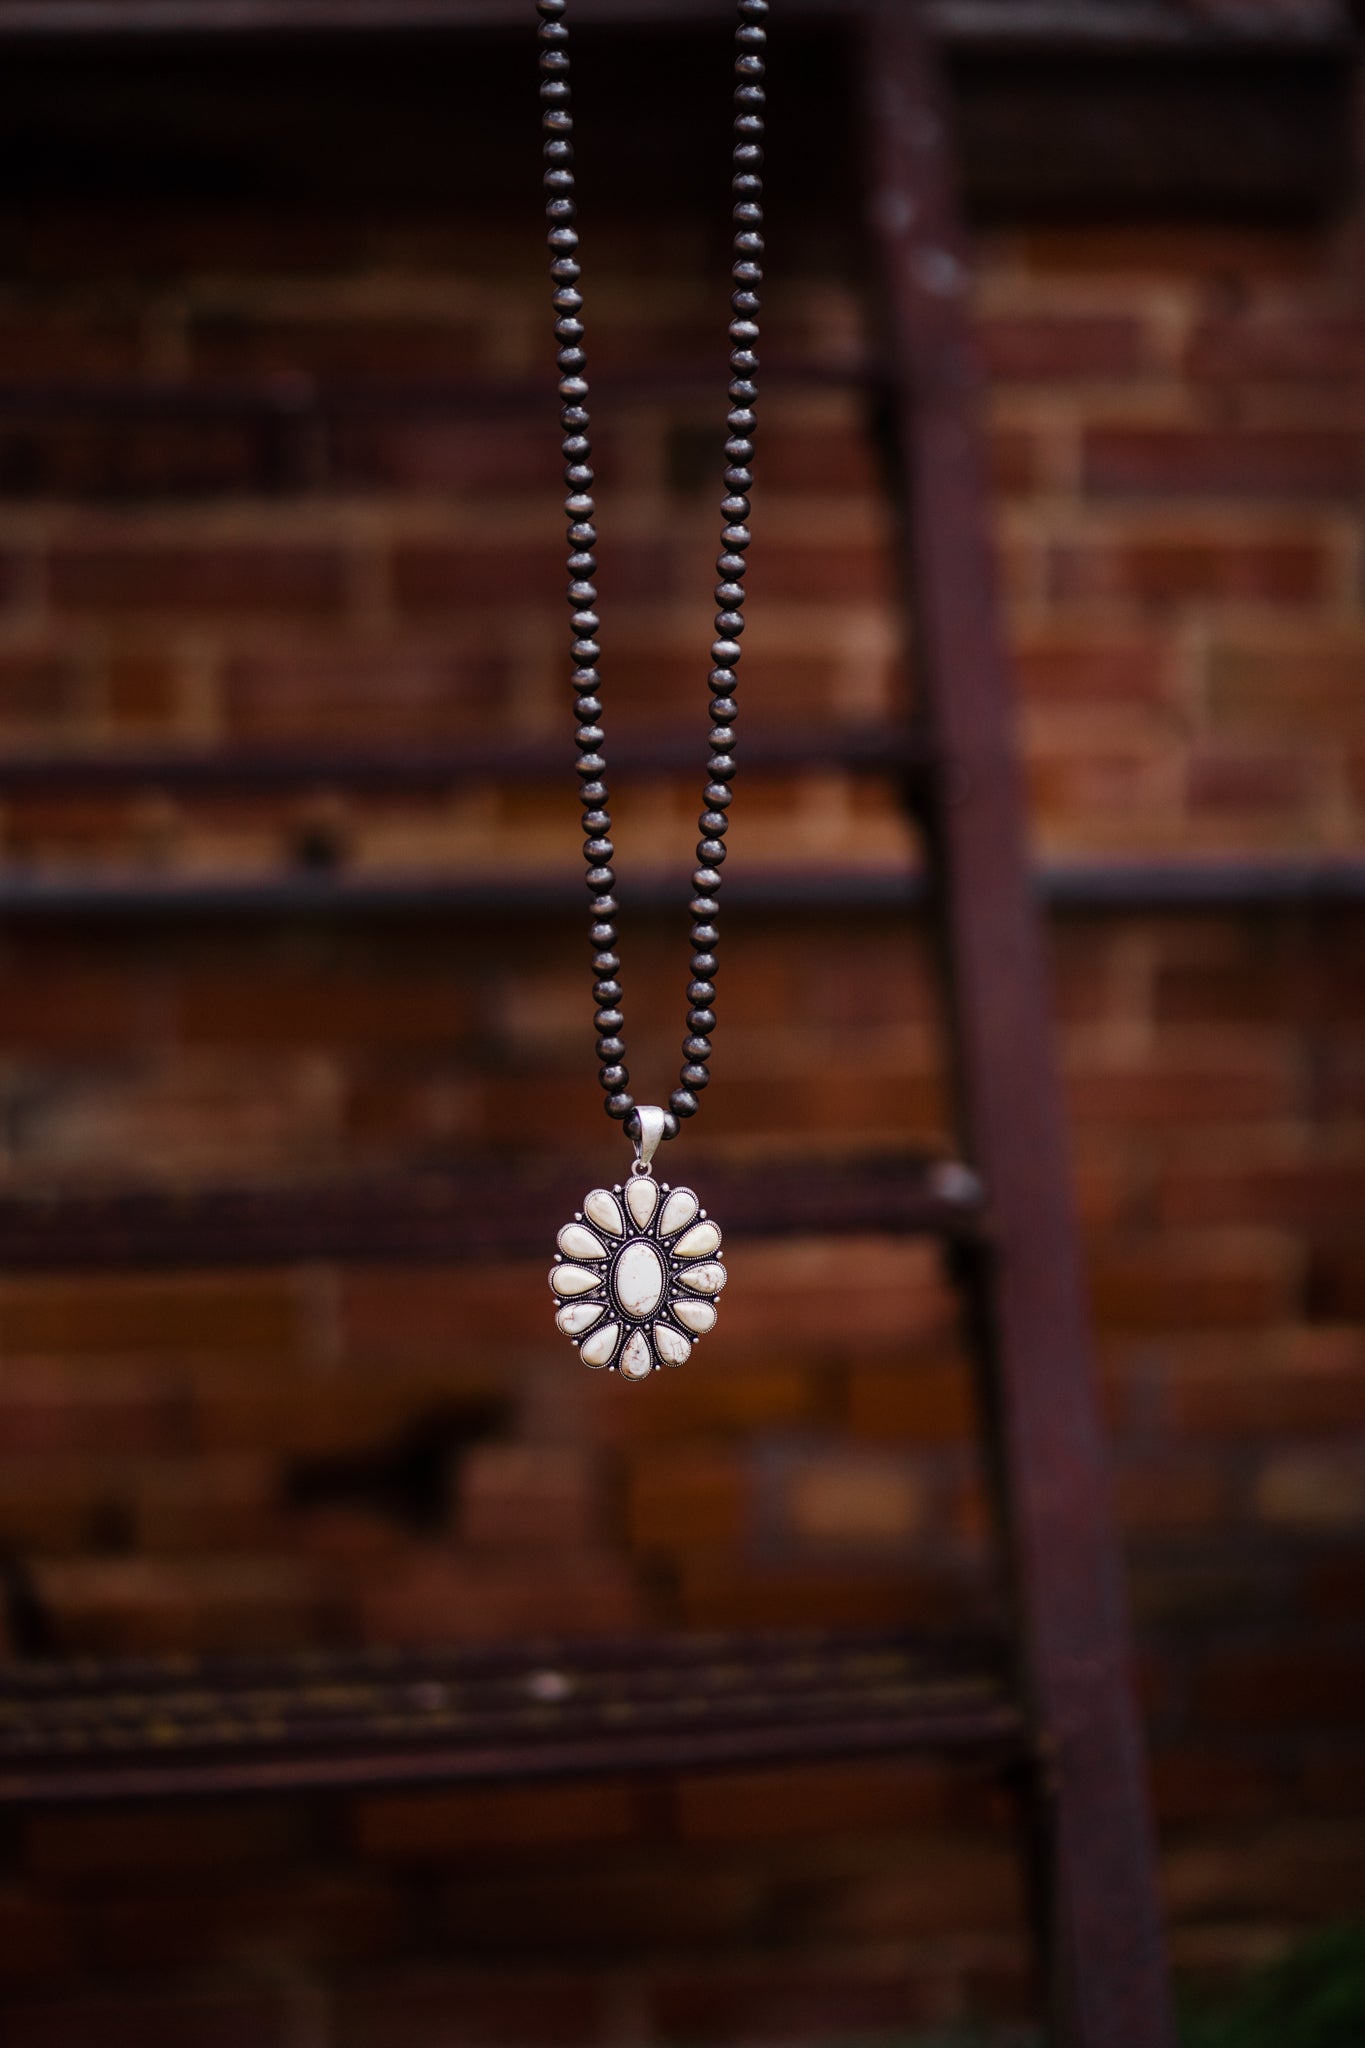 Gone Again Necklace - Middle West Apparel